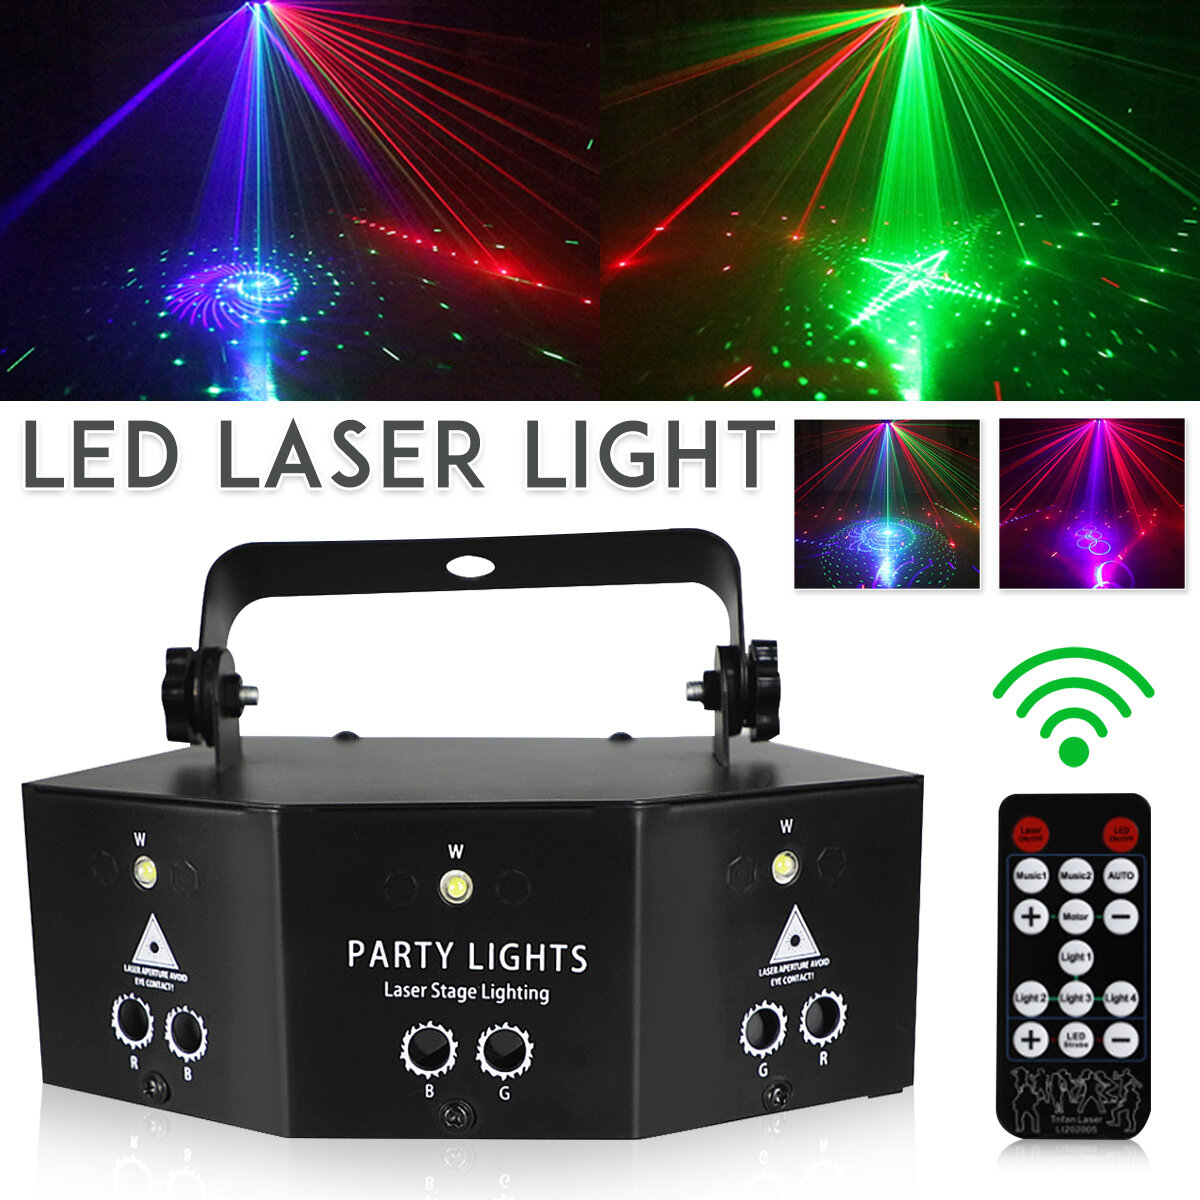 

9 Holes DMX LED Stage Laser Light Projector Disco Lamp For DJ Club Bar KTV Lighting Effect with Remote Control